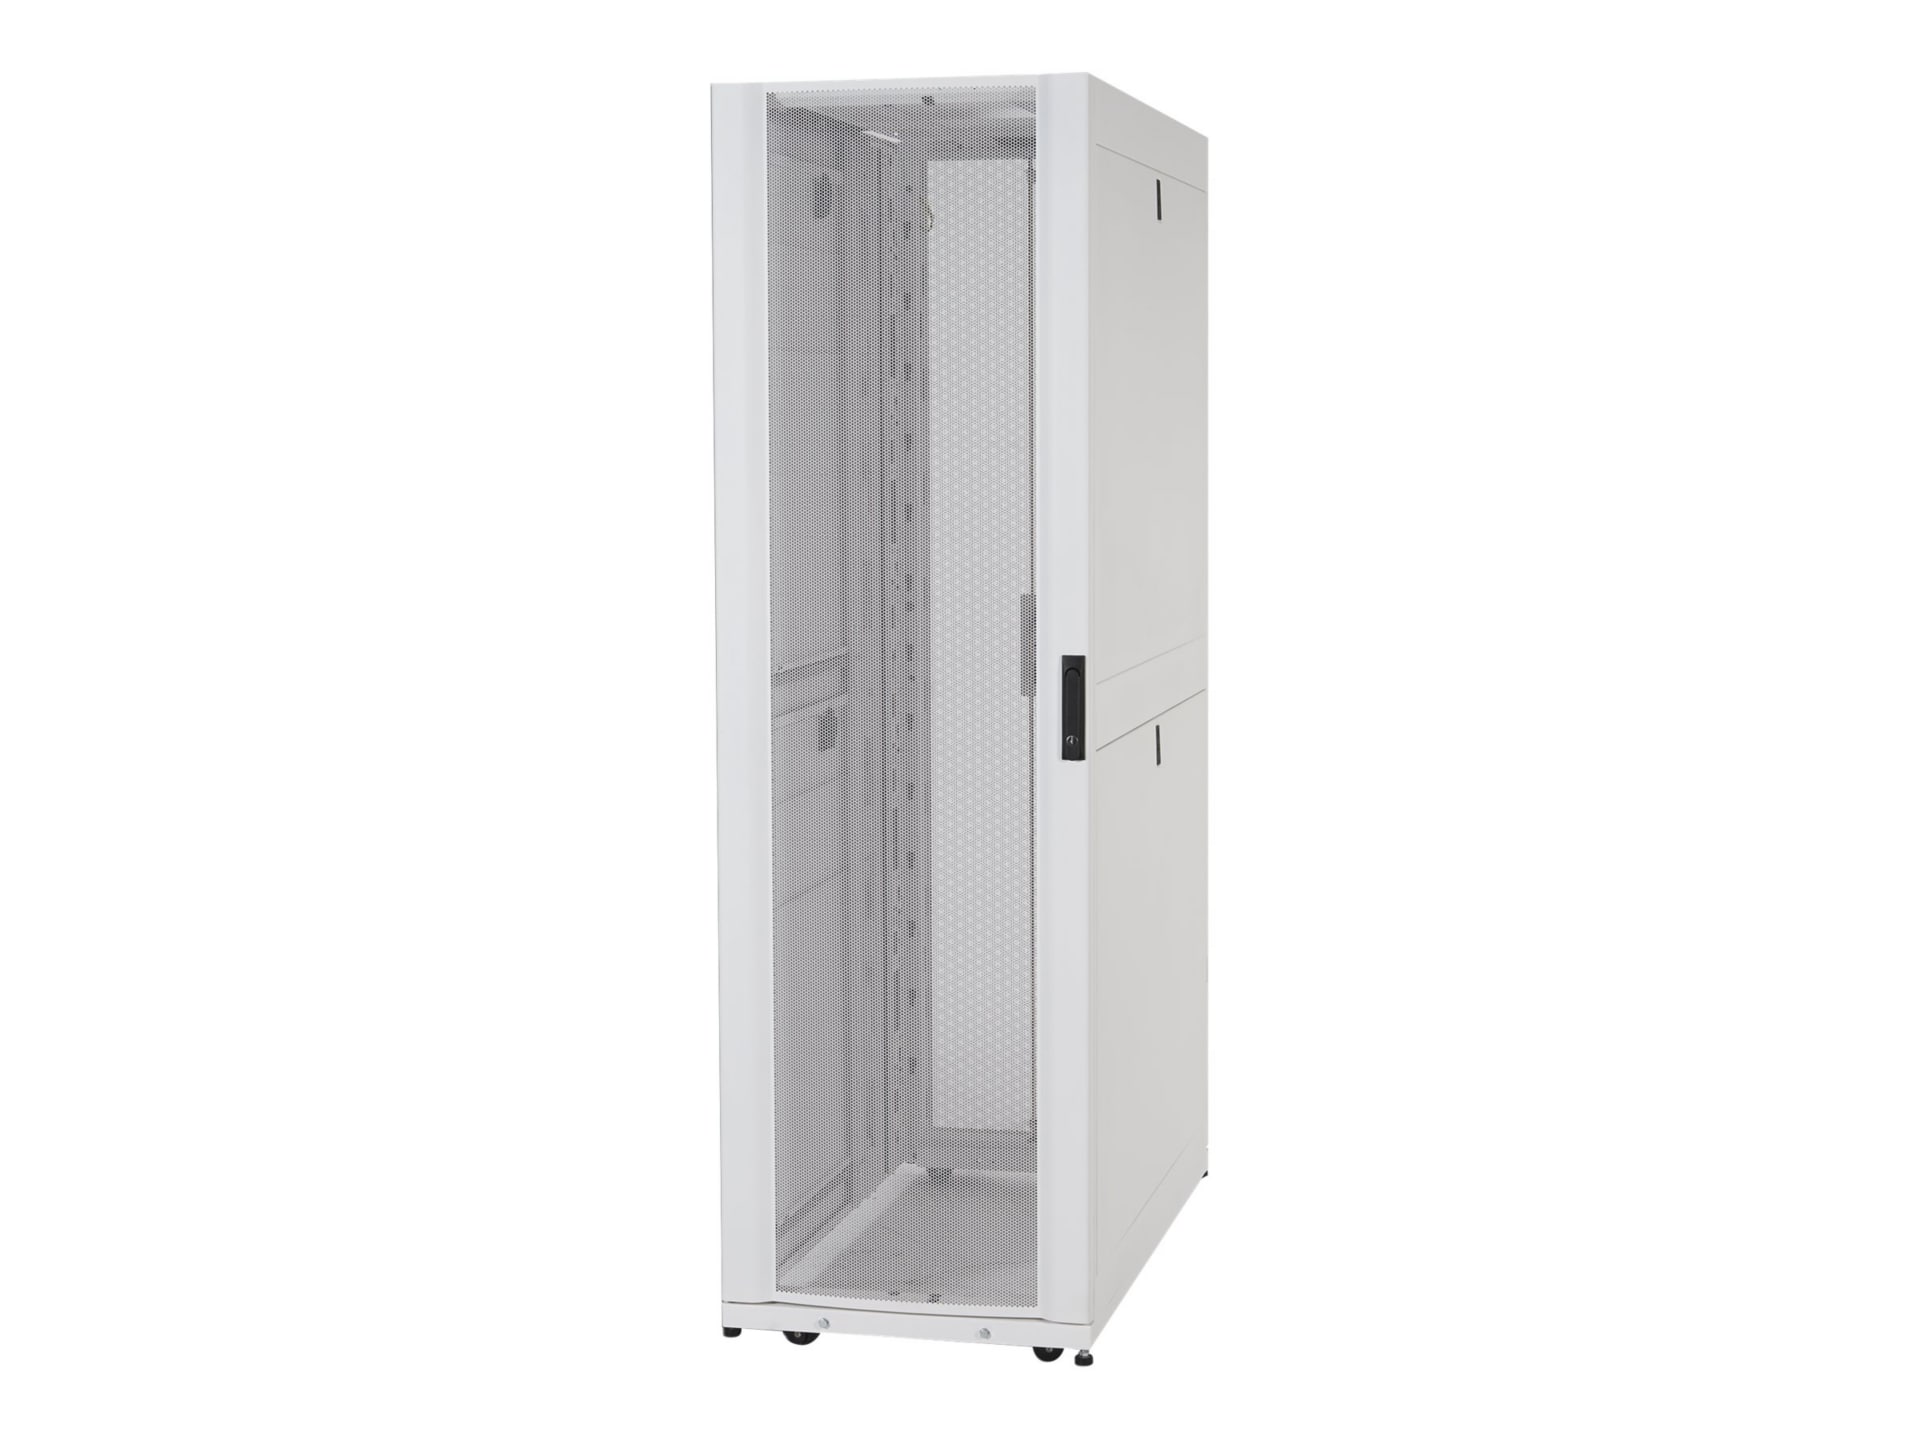 APC by Schneider Electric NetShelter SX 48U 600mm Wide x 1200mm Deep Enclosure with Sides White